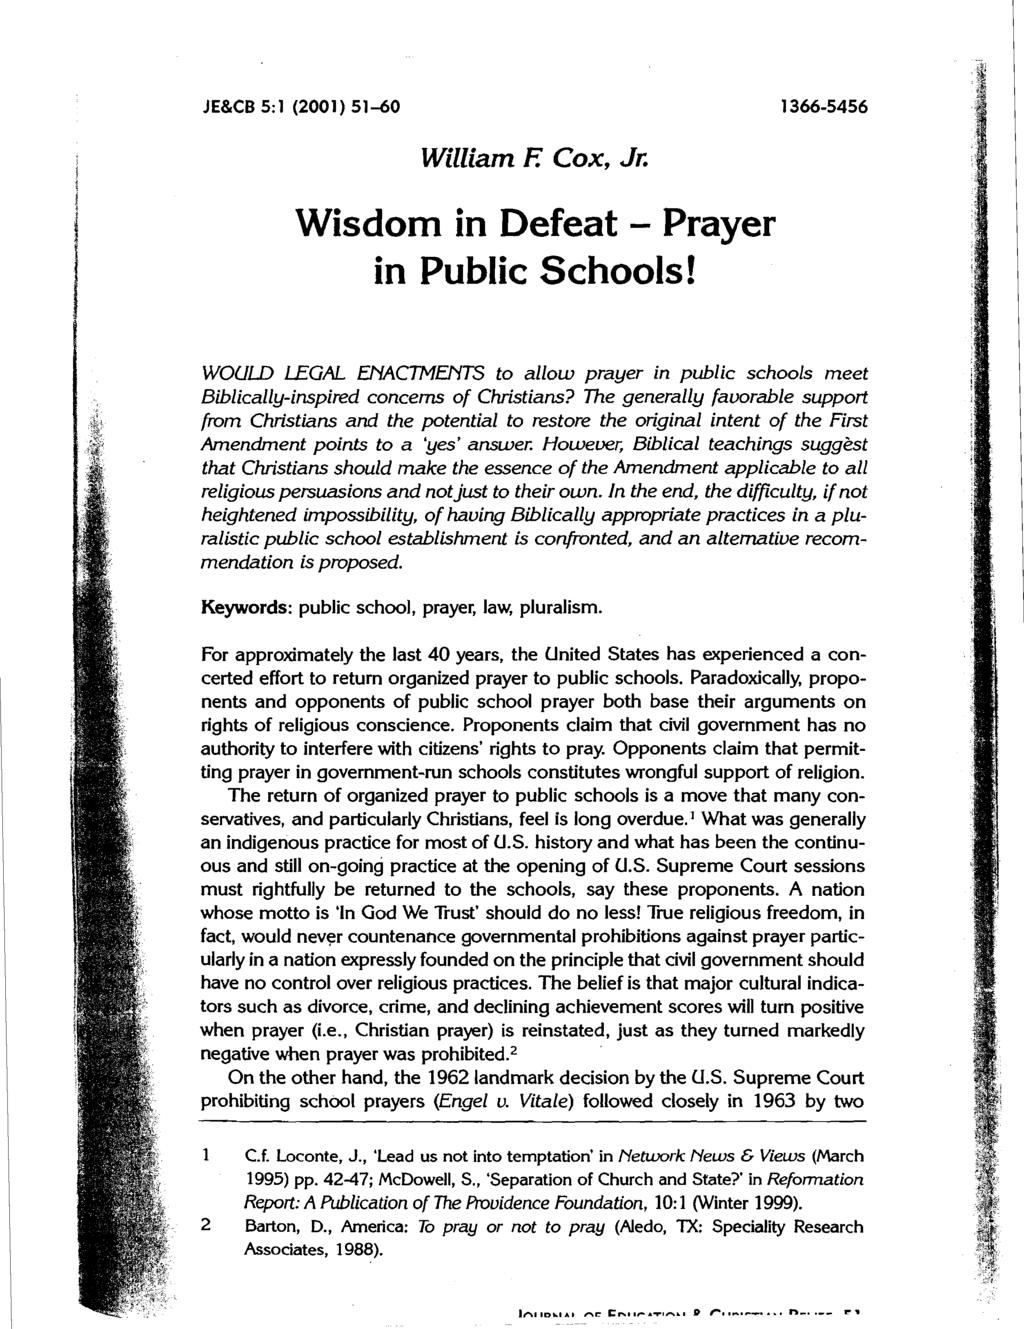 William E Cox, Jr. Wisdom in Defeat - Prayer in Public Schools! WOULD LEGAL EHACTMEIYTS to allow prayer in public schools meet Bib1 ical ly-inspired concern of Christians?